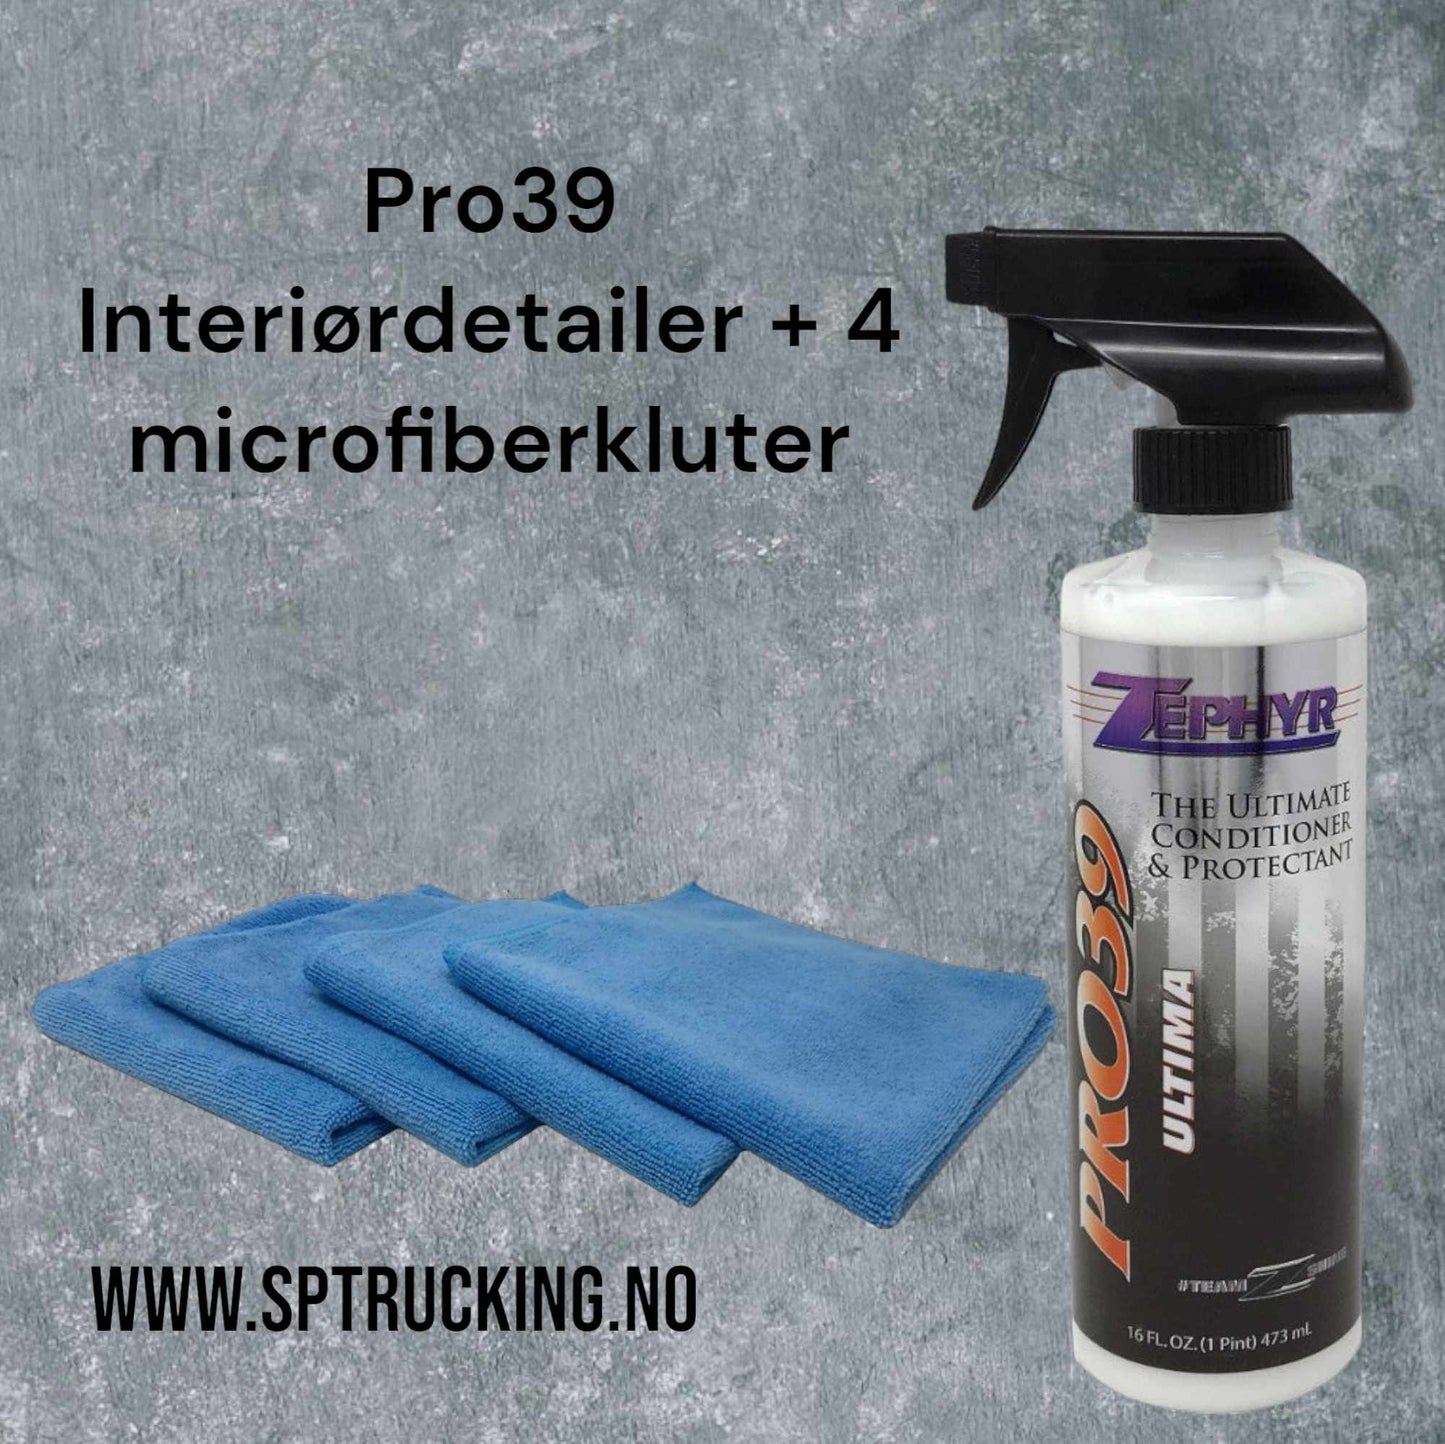 Pro-39 Ultima Conditioner/Protectant + 4 pack Microfiber kluter